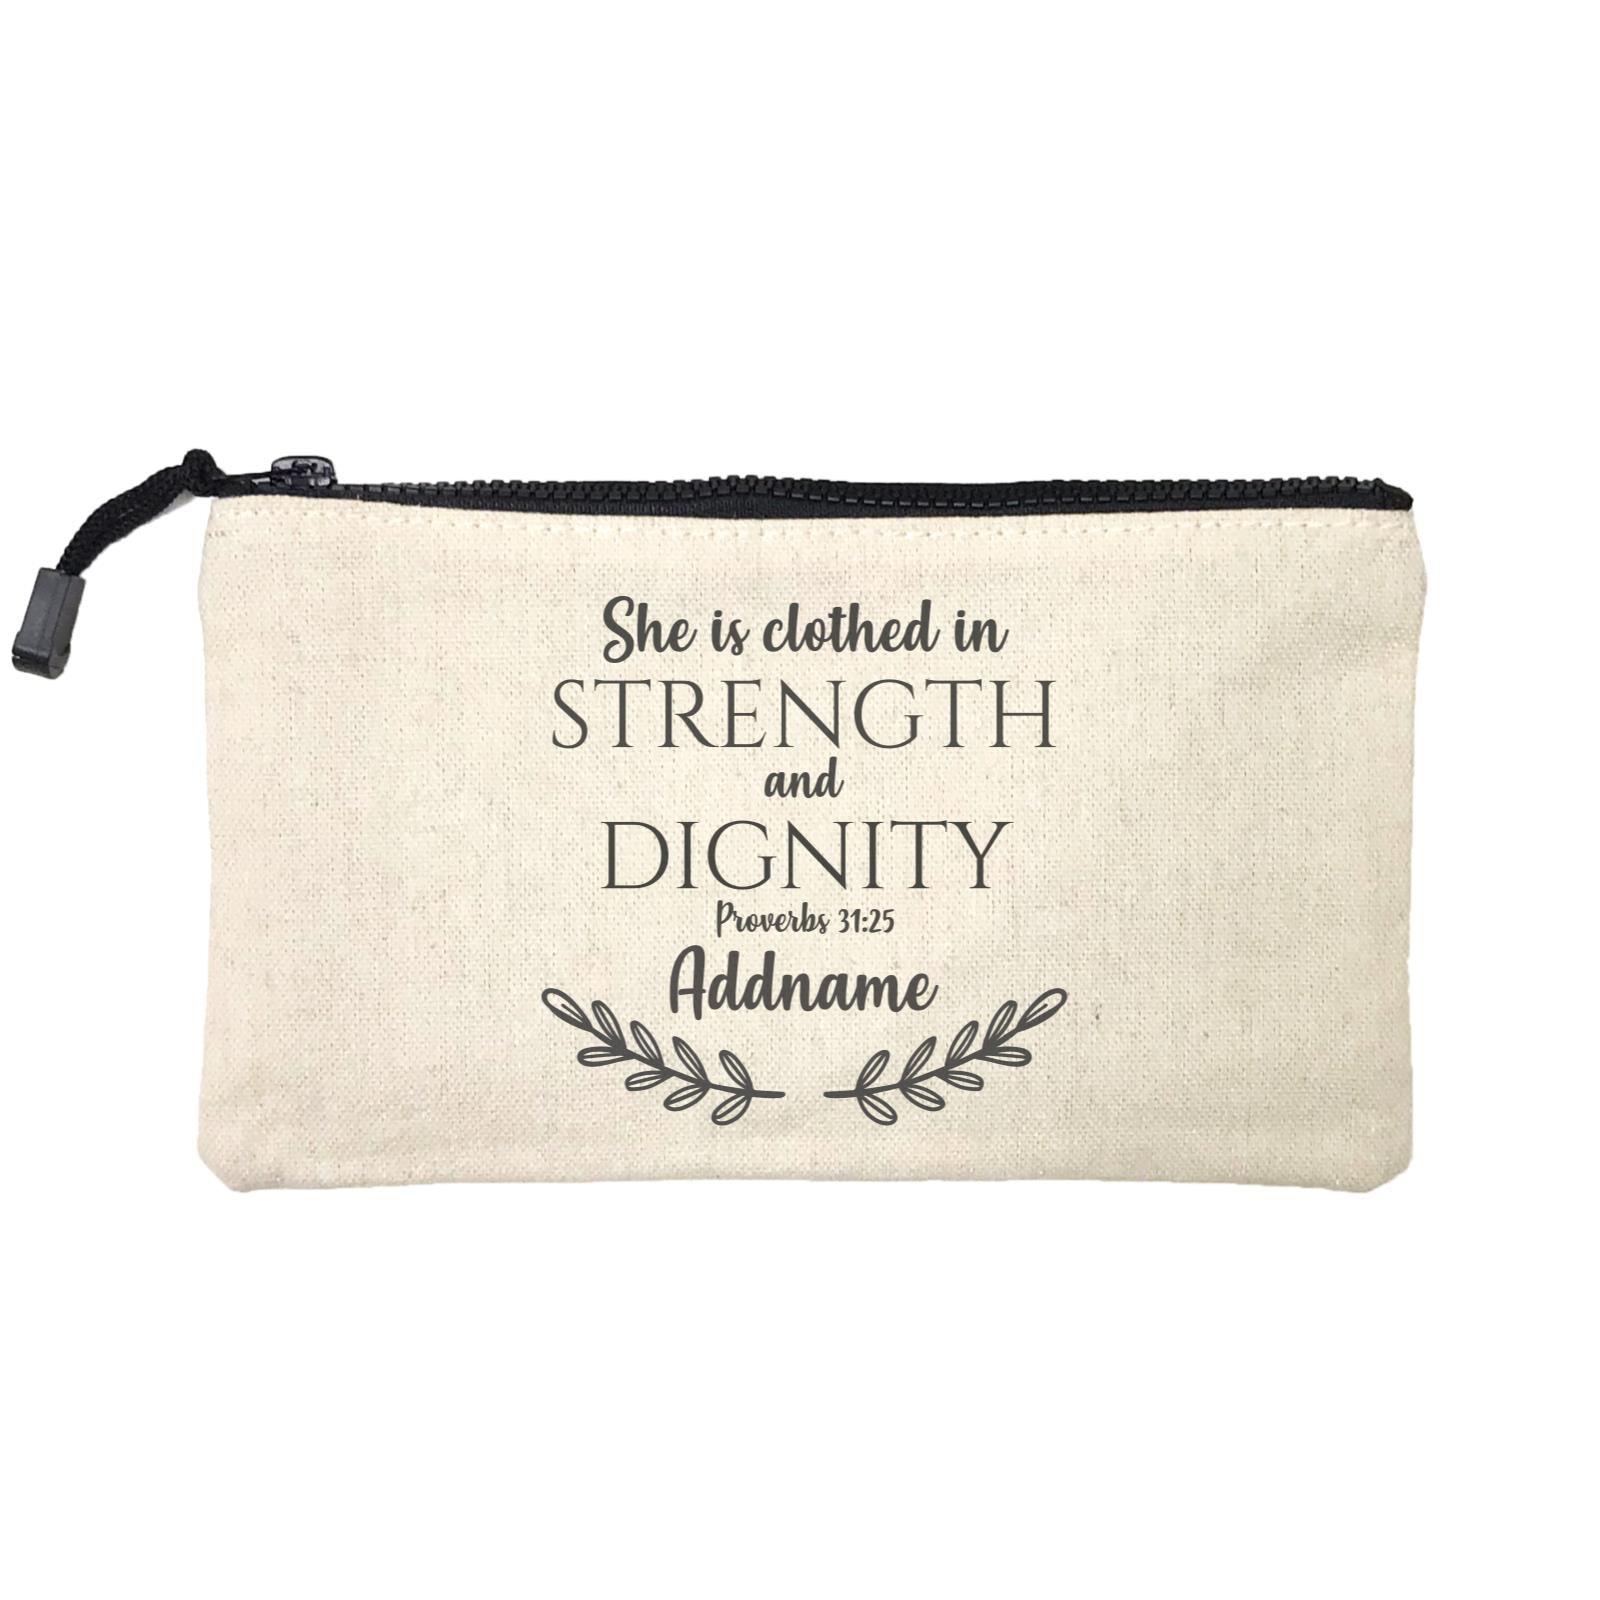 Christian For Her She Is Clothed in Strength and Dignity Proverbs 31.25 Addname Mini Accessories Stationery Pouch